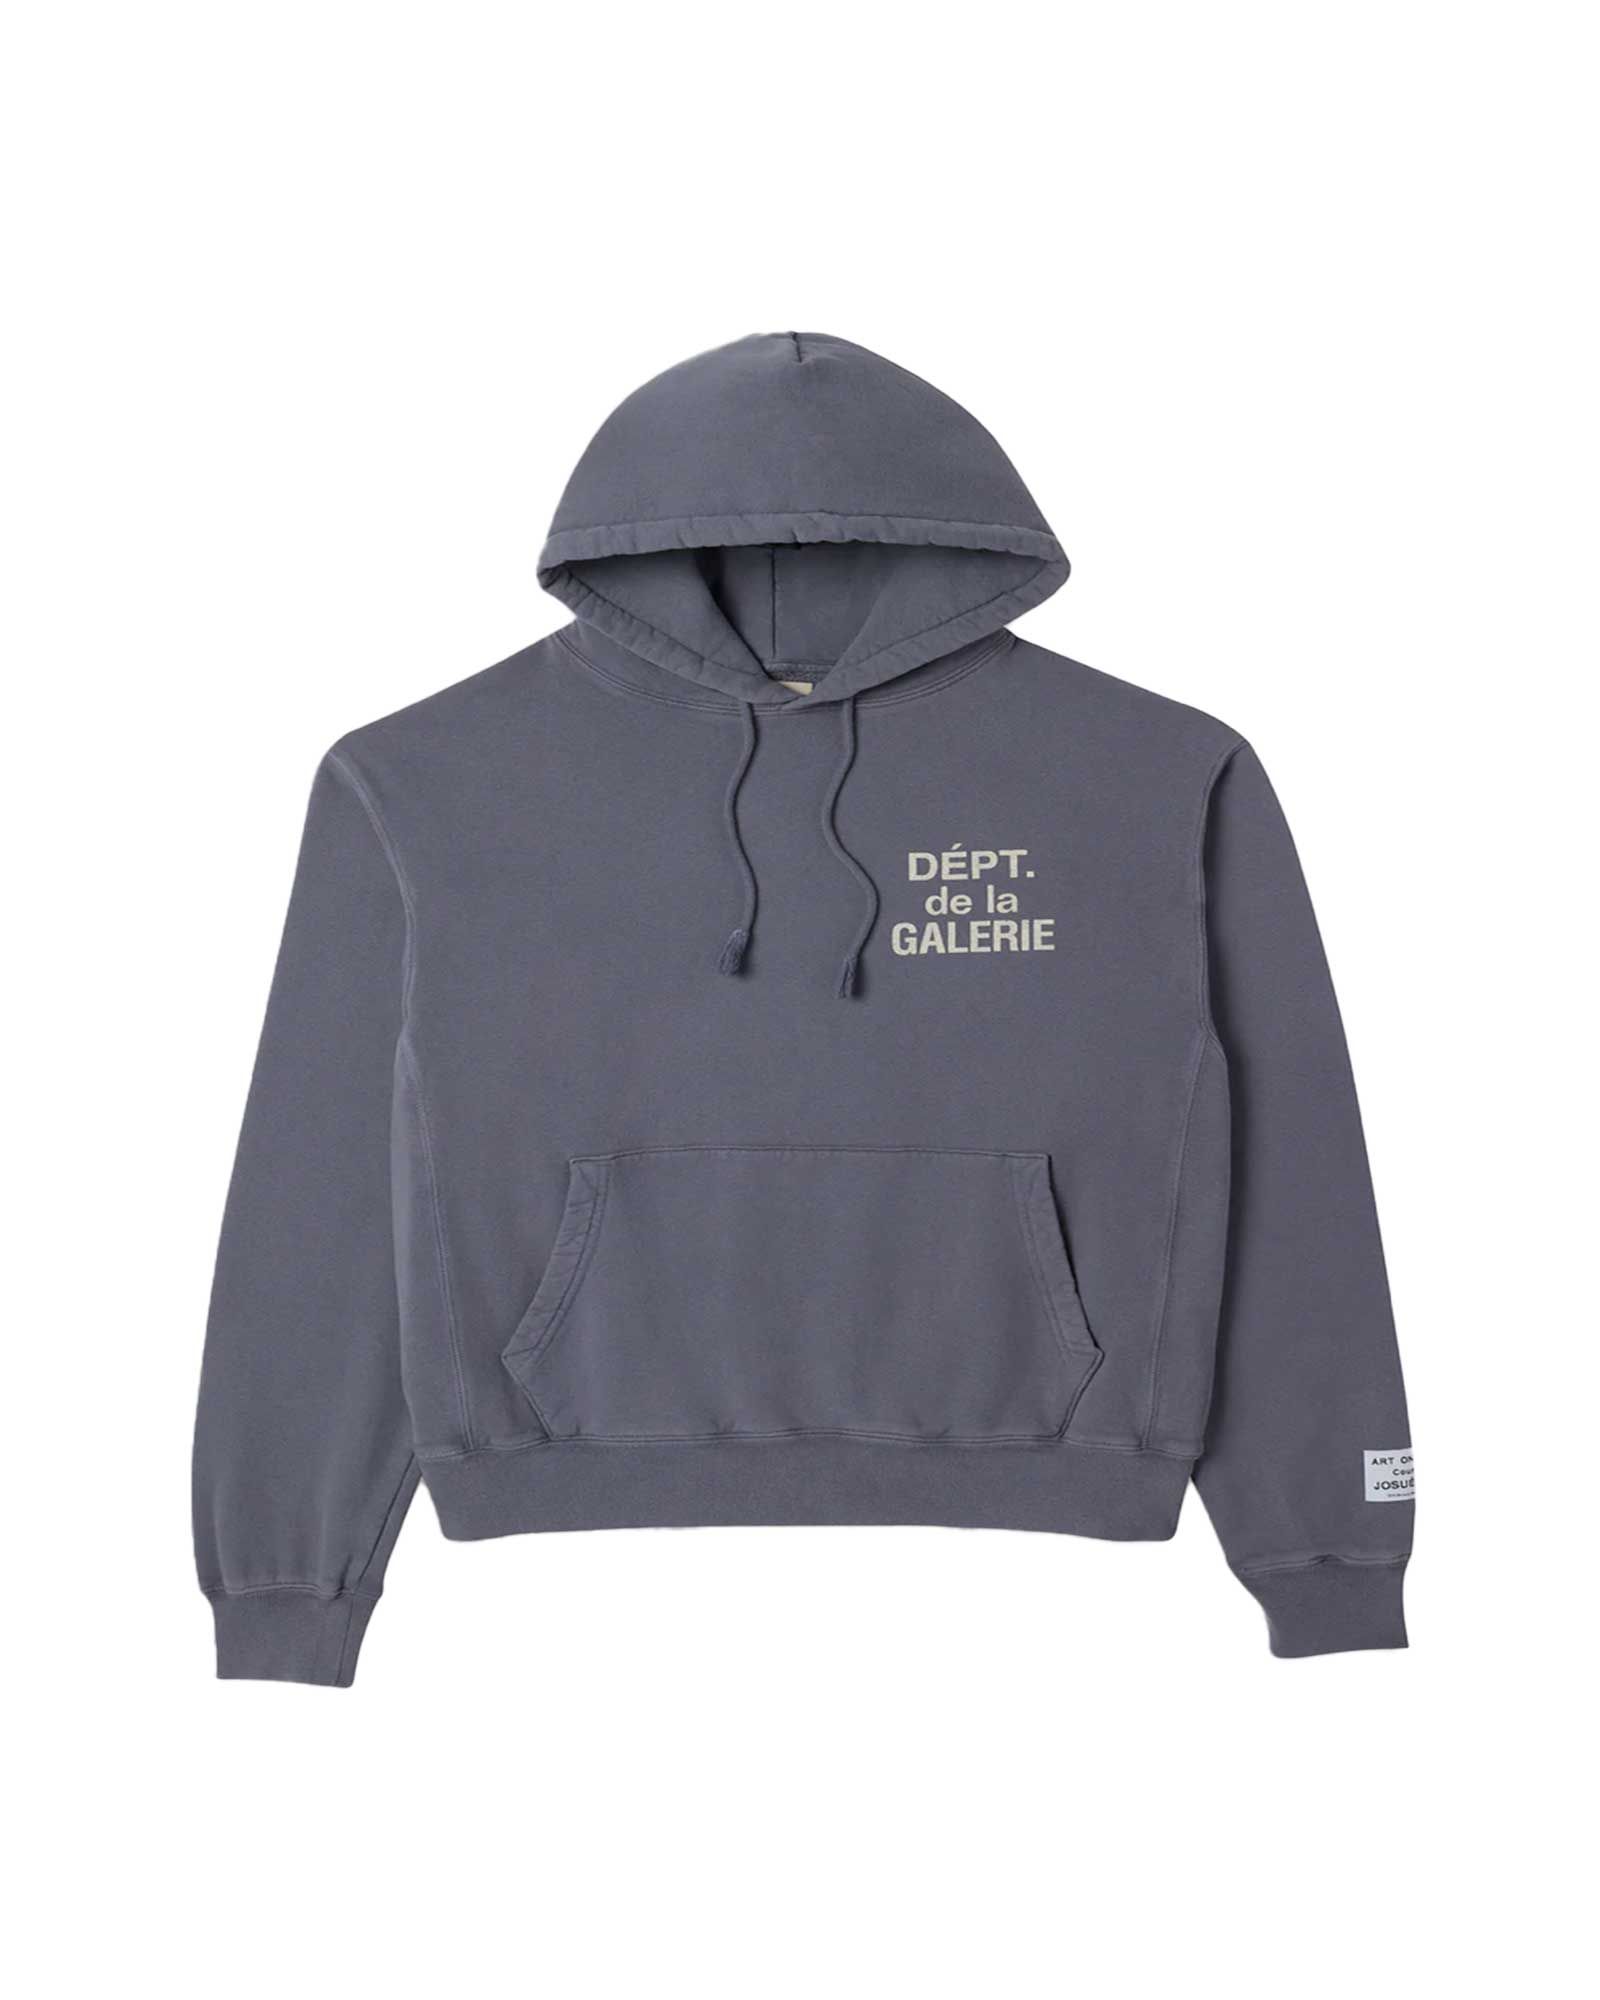 GALLERY DEPT FRENCH LOGO HOODIE - パーカー